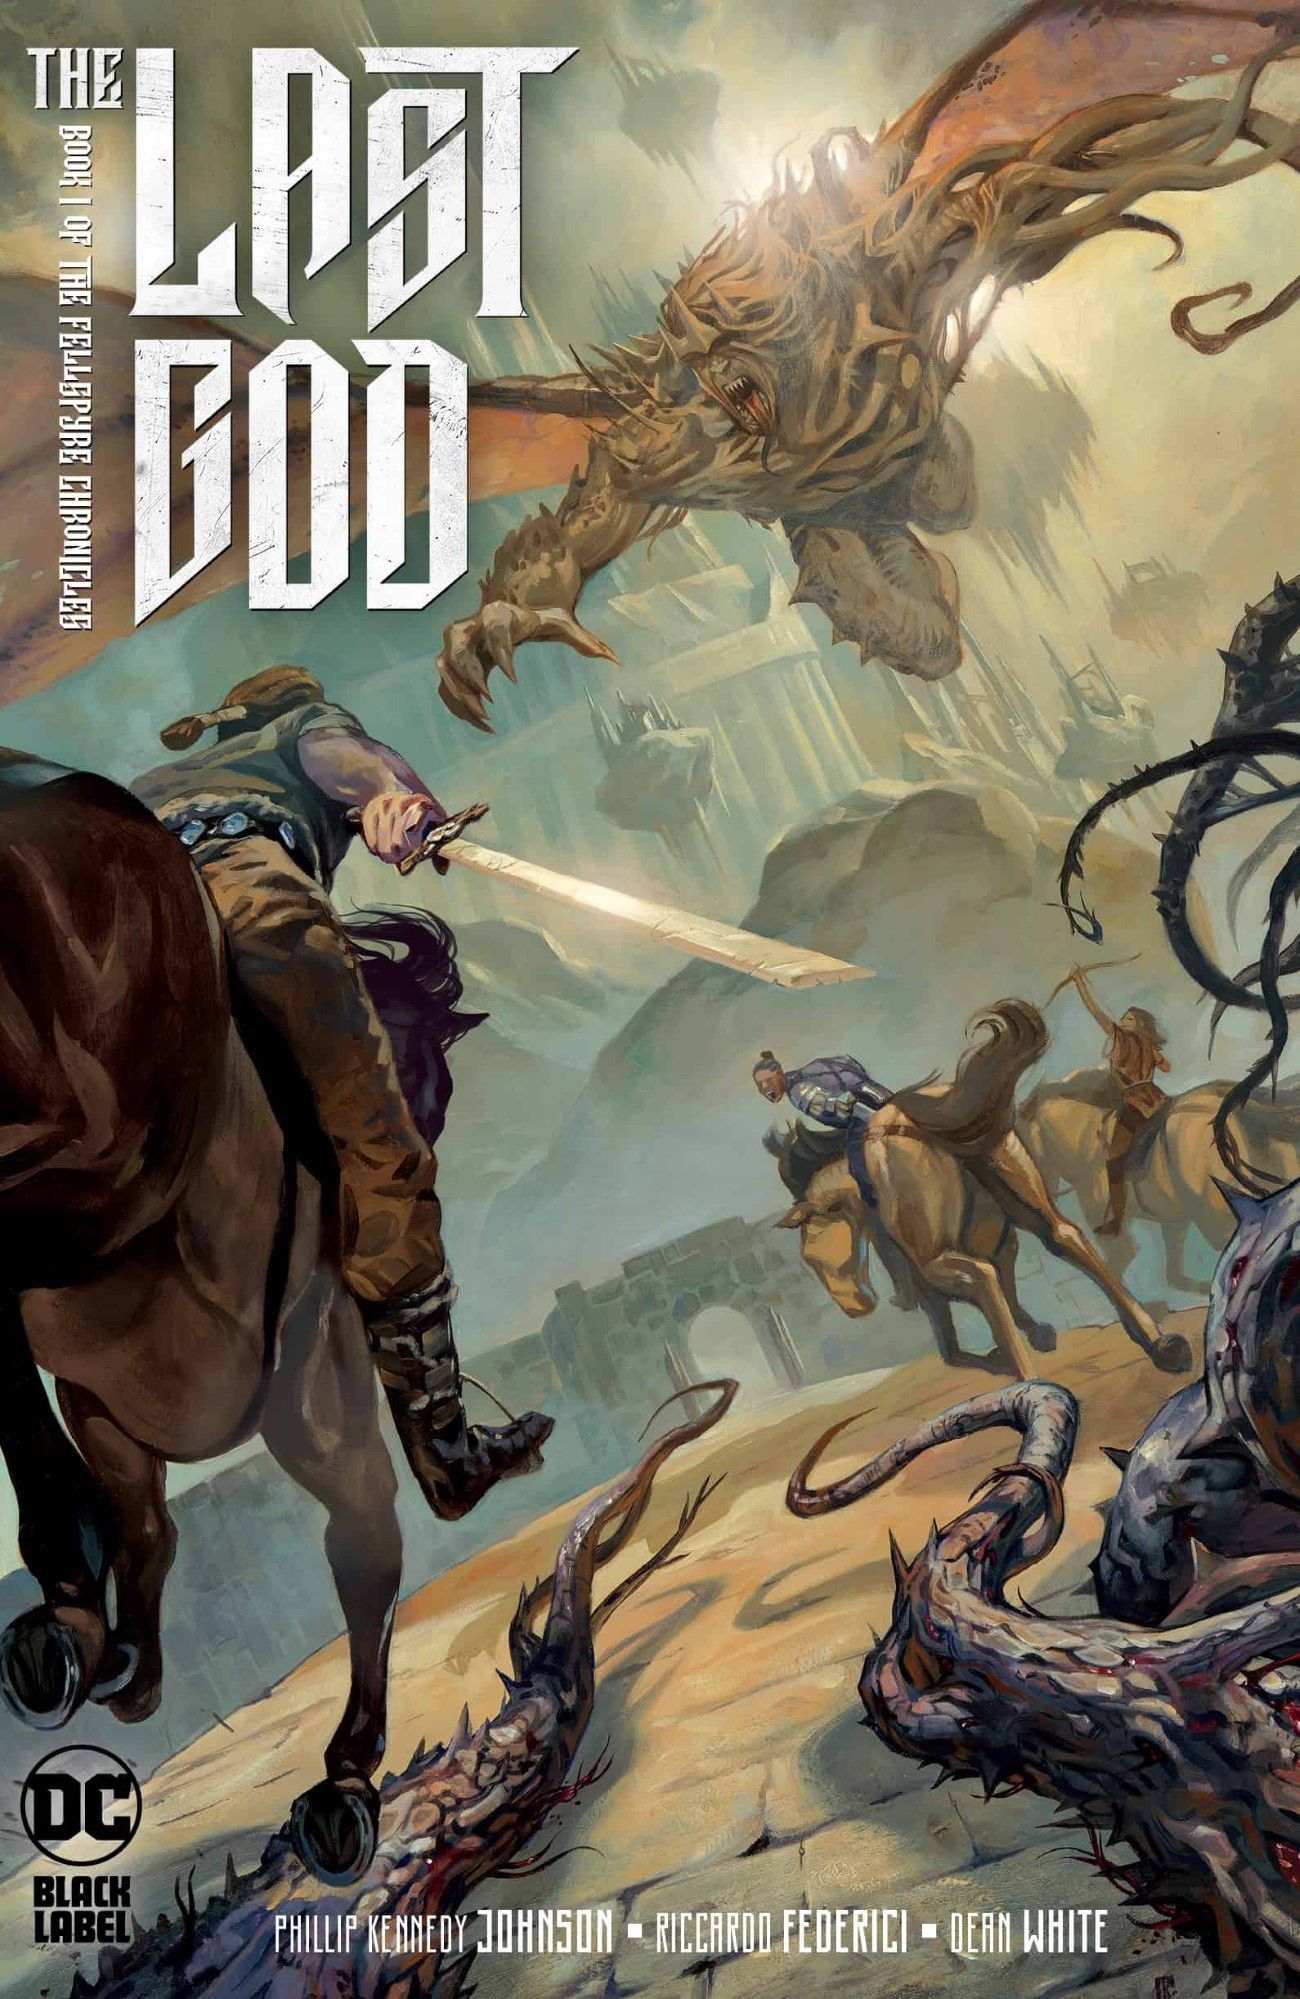 LAST GOD #1 BOOK ONE OF THE FELLSPYRE CHRONICLE DC COMIC BOOK NEW OCT 2019 